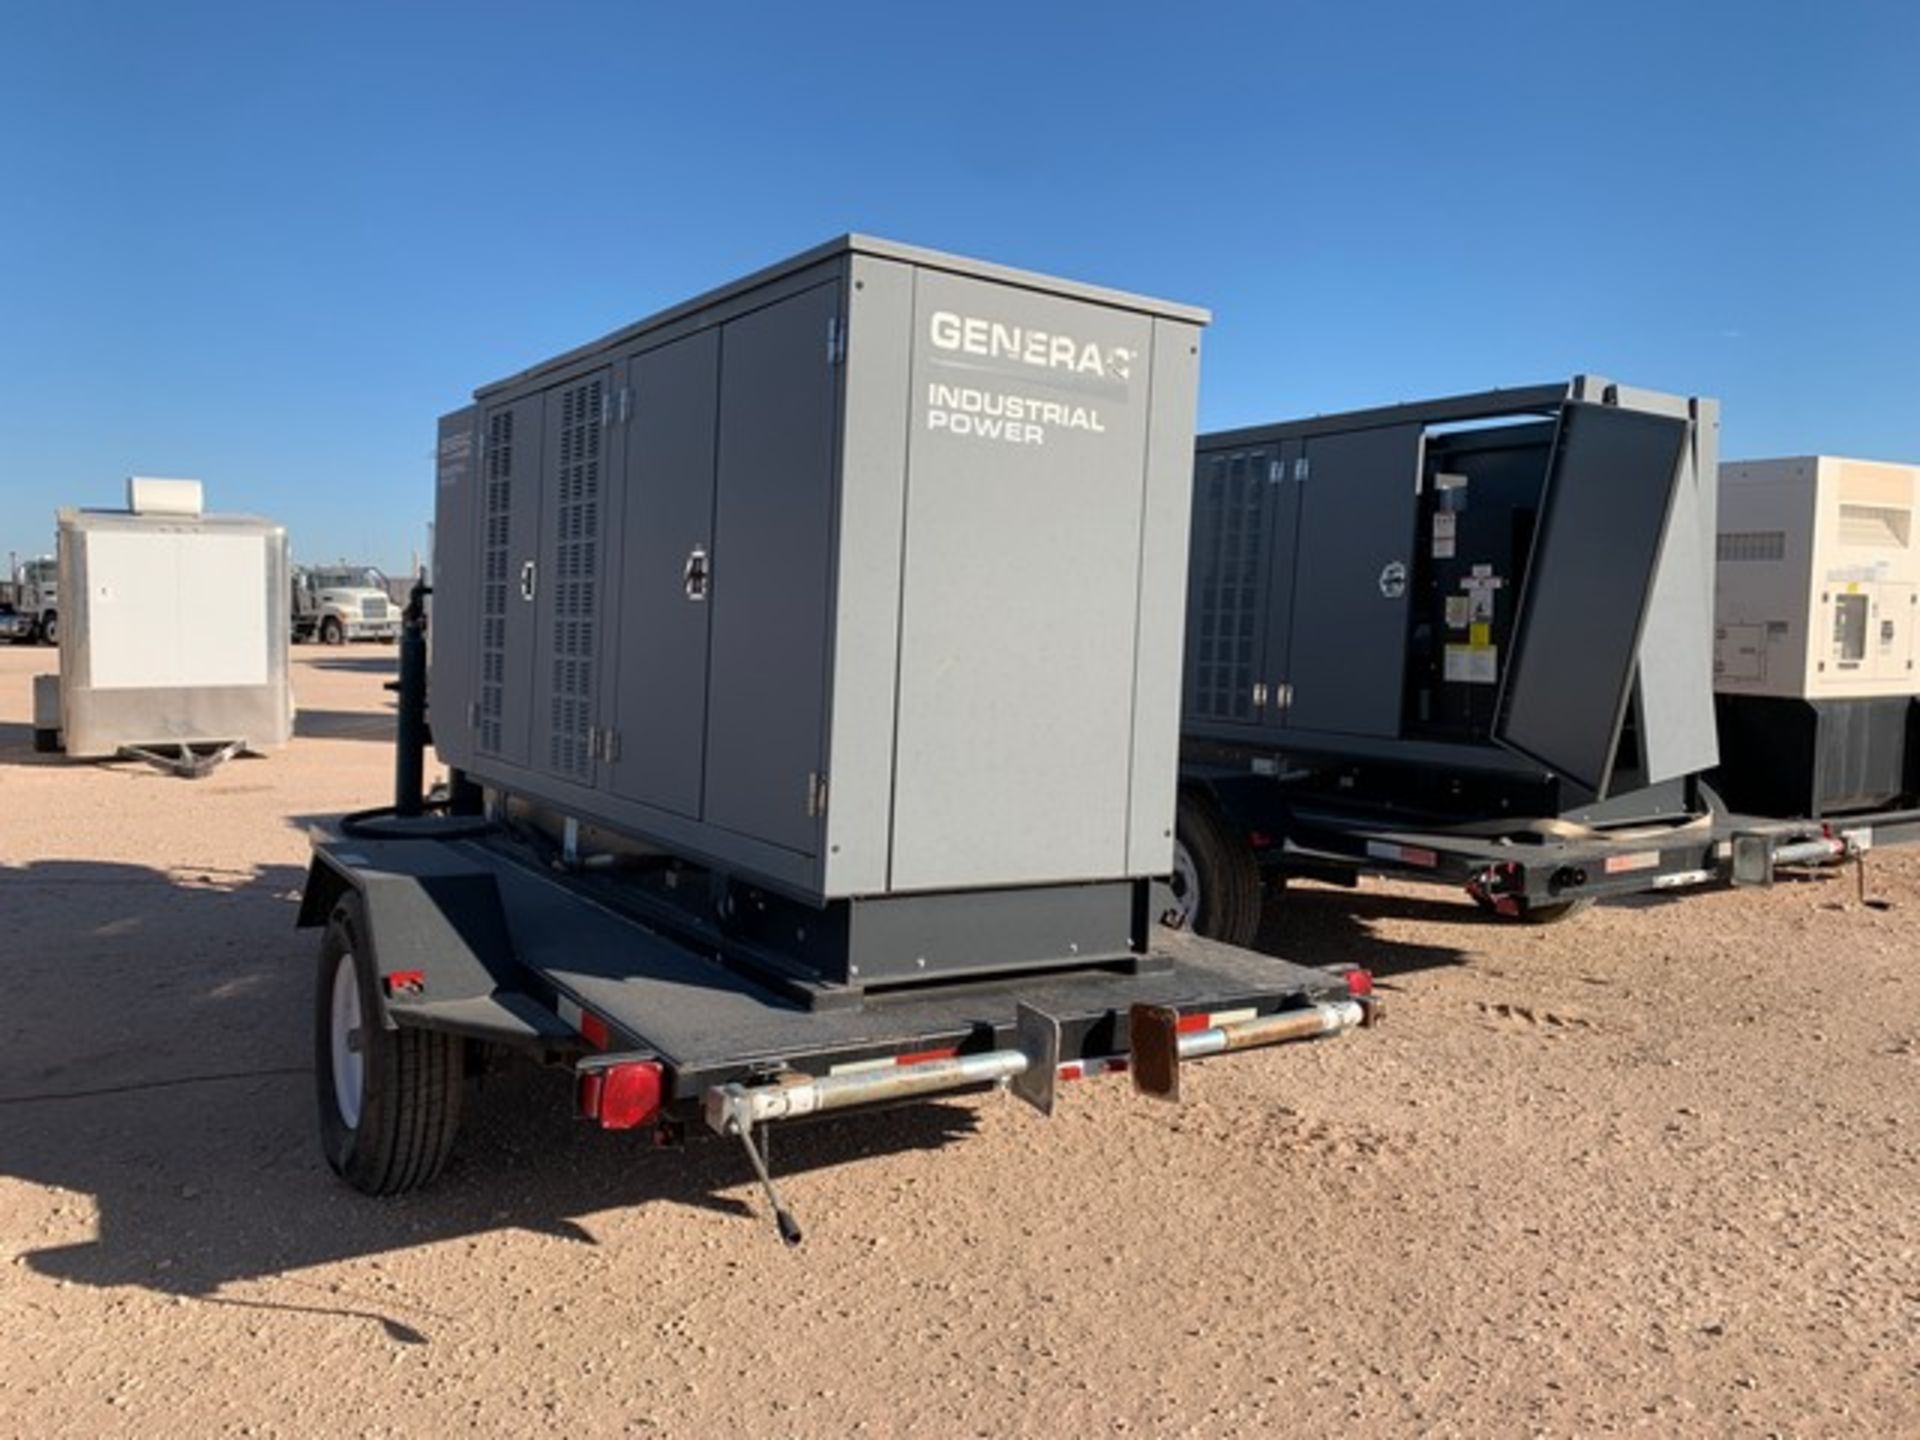 Located in YARD 1 - Midland, TX 2013 GENERAC INDUSTRIAL POWER 130 KW, 277/480V 3 PHASE ELECTRIC - Image 3 of 4